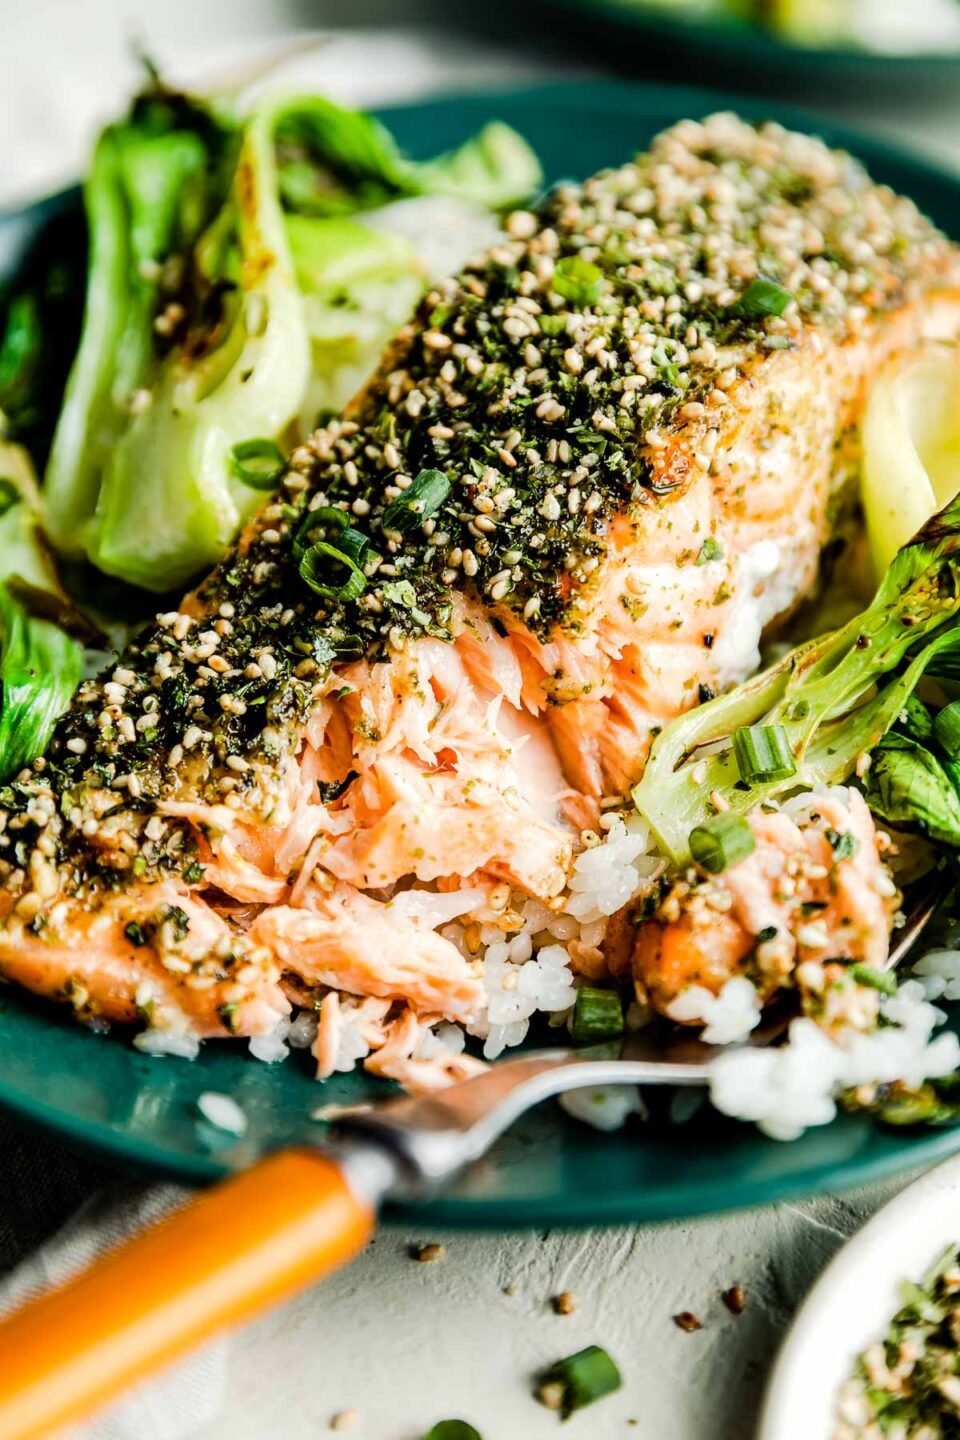 A close-up macro shot of a partially eaten furikake salmon fillet on a green plate with a wood-handled fork.